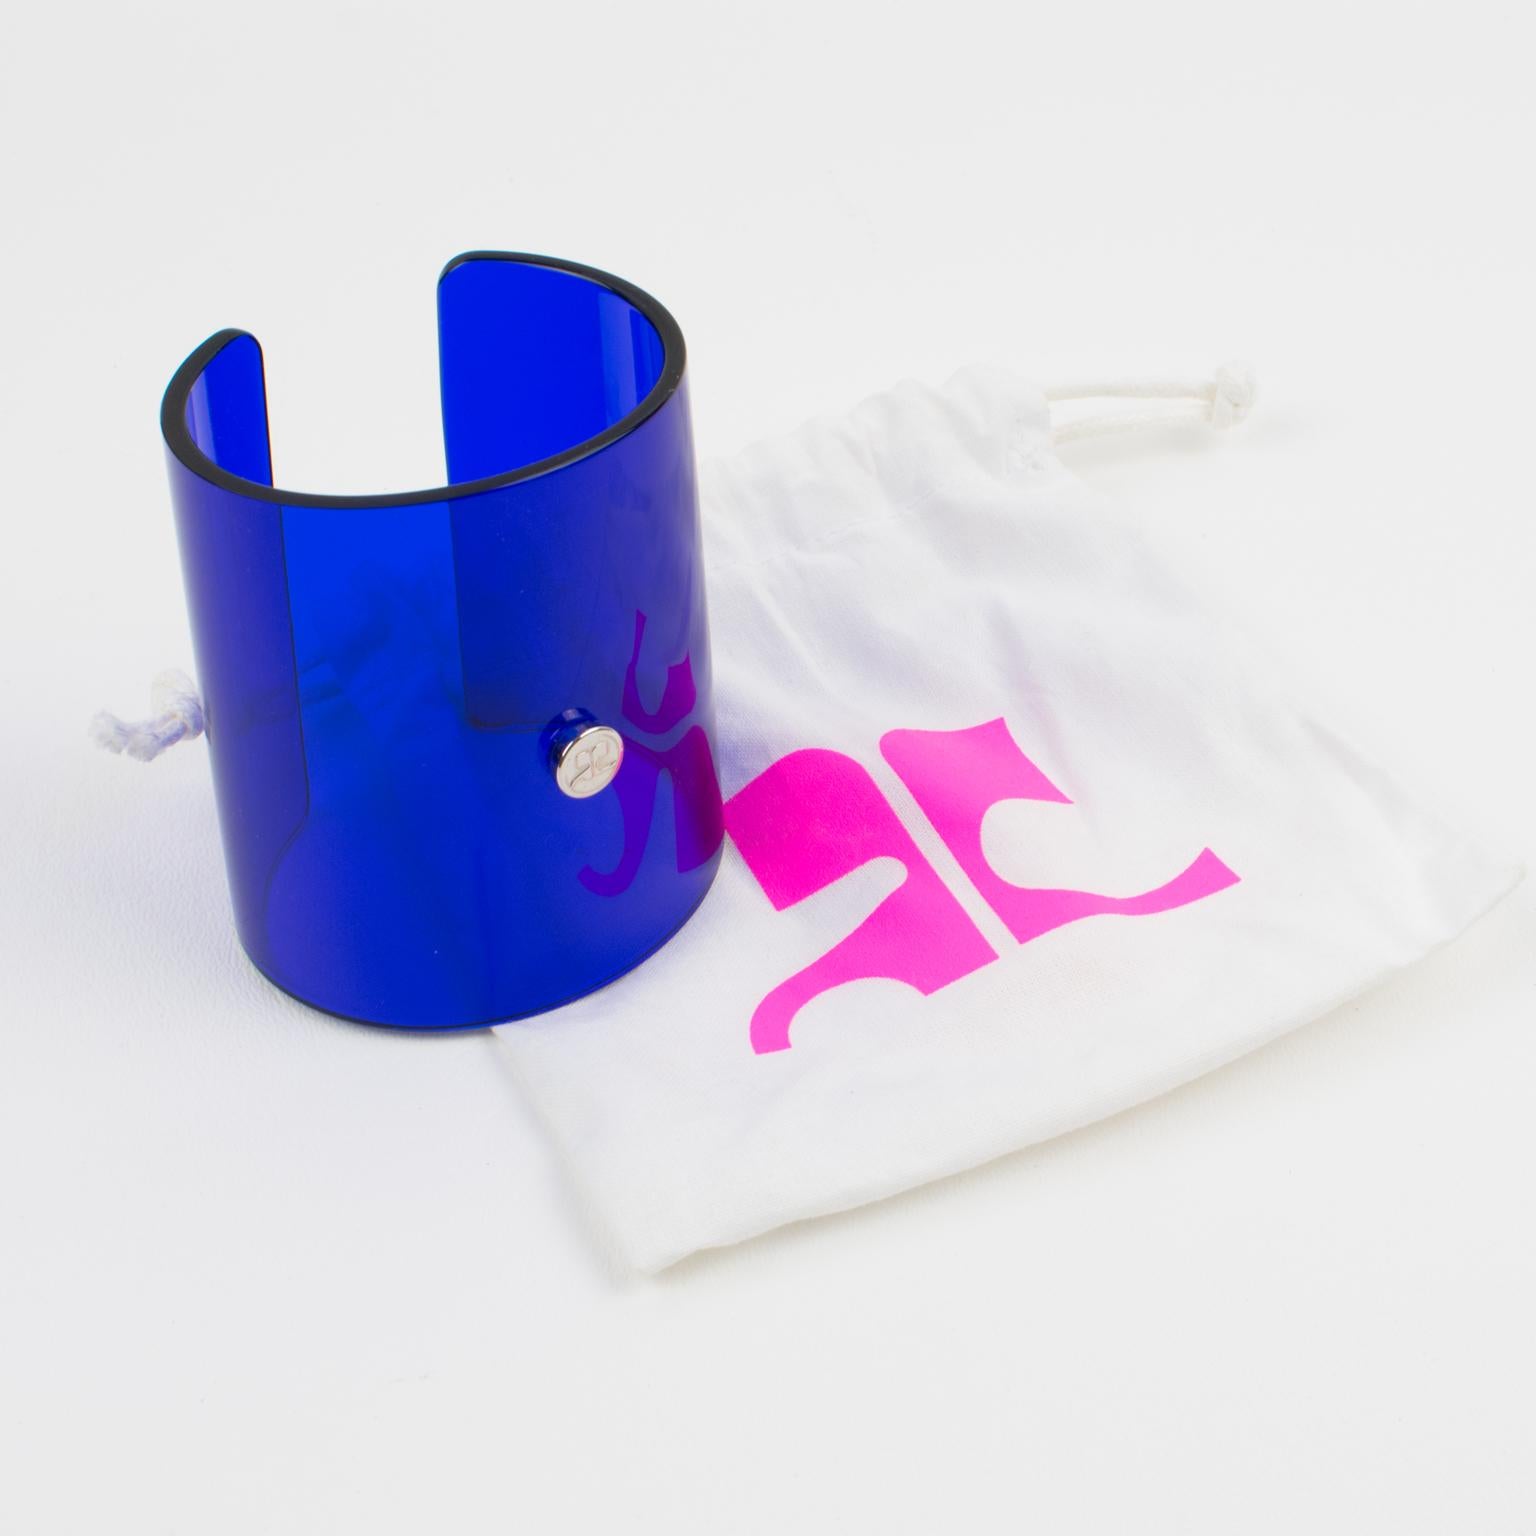 This adorable Courreges Paris signed Lucite or acrylic bangle bracelet features an oversized cuff design in a transparent cobalt blue color with a cone shape. The piece is signed on the front with the chromed metal AC, Courrege's iconic brand logo.